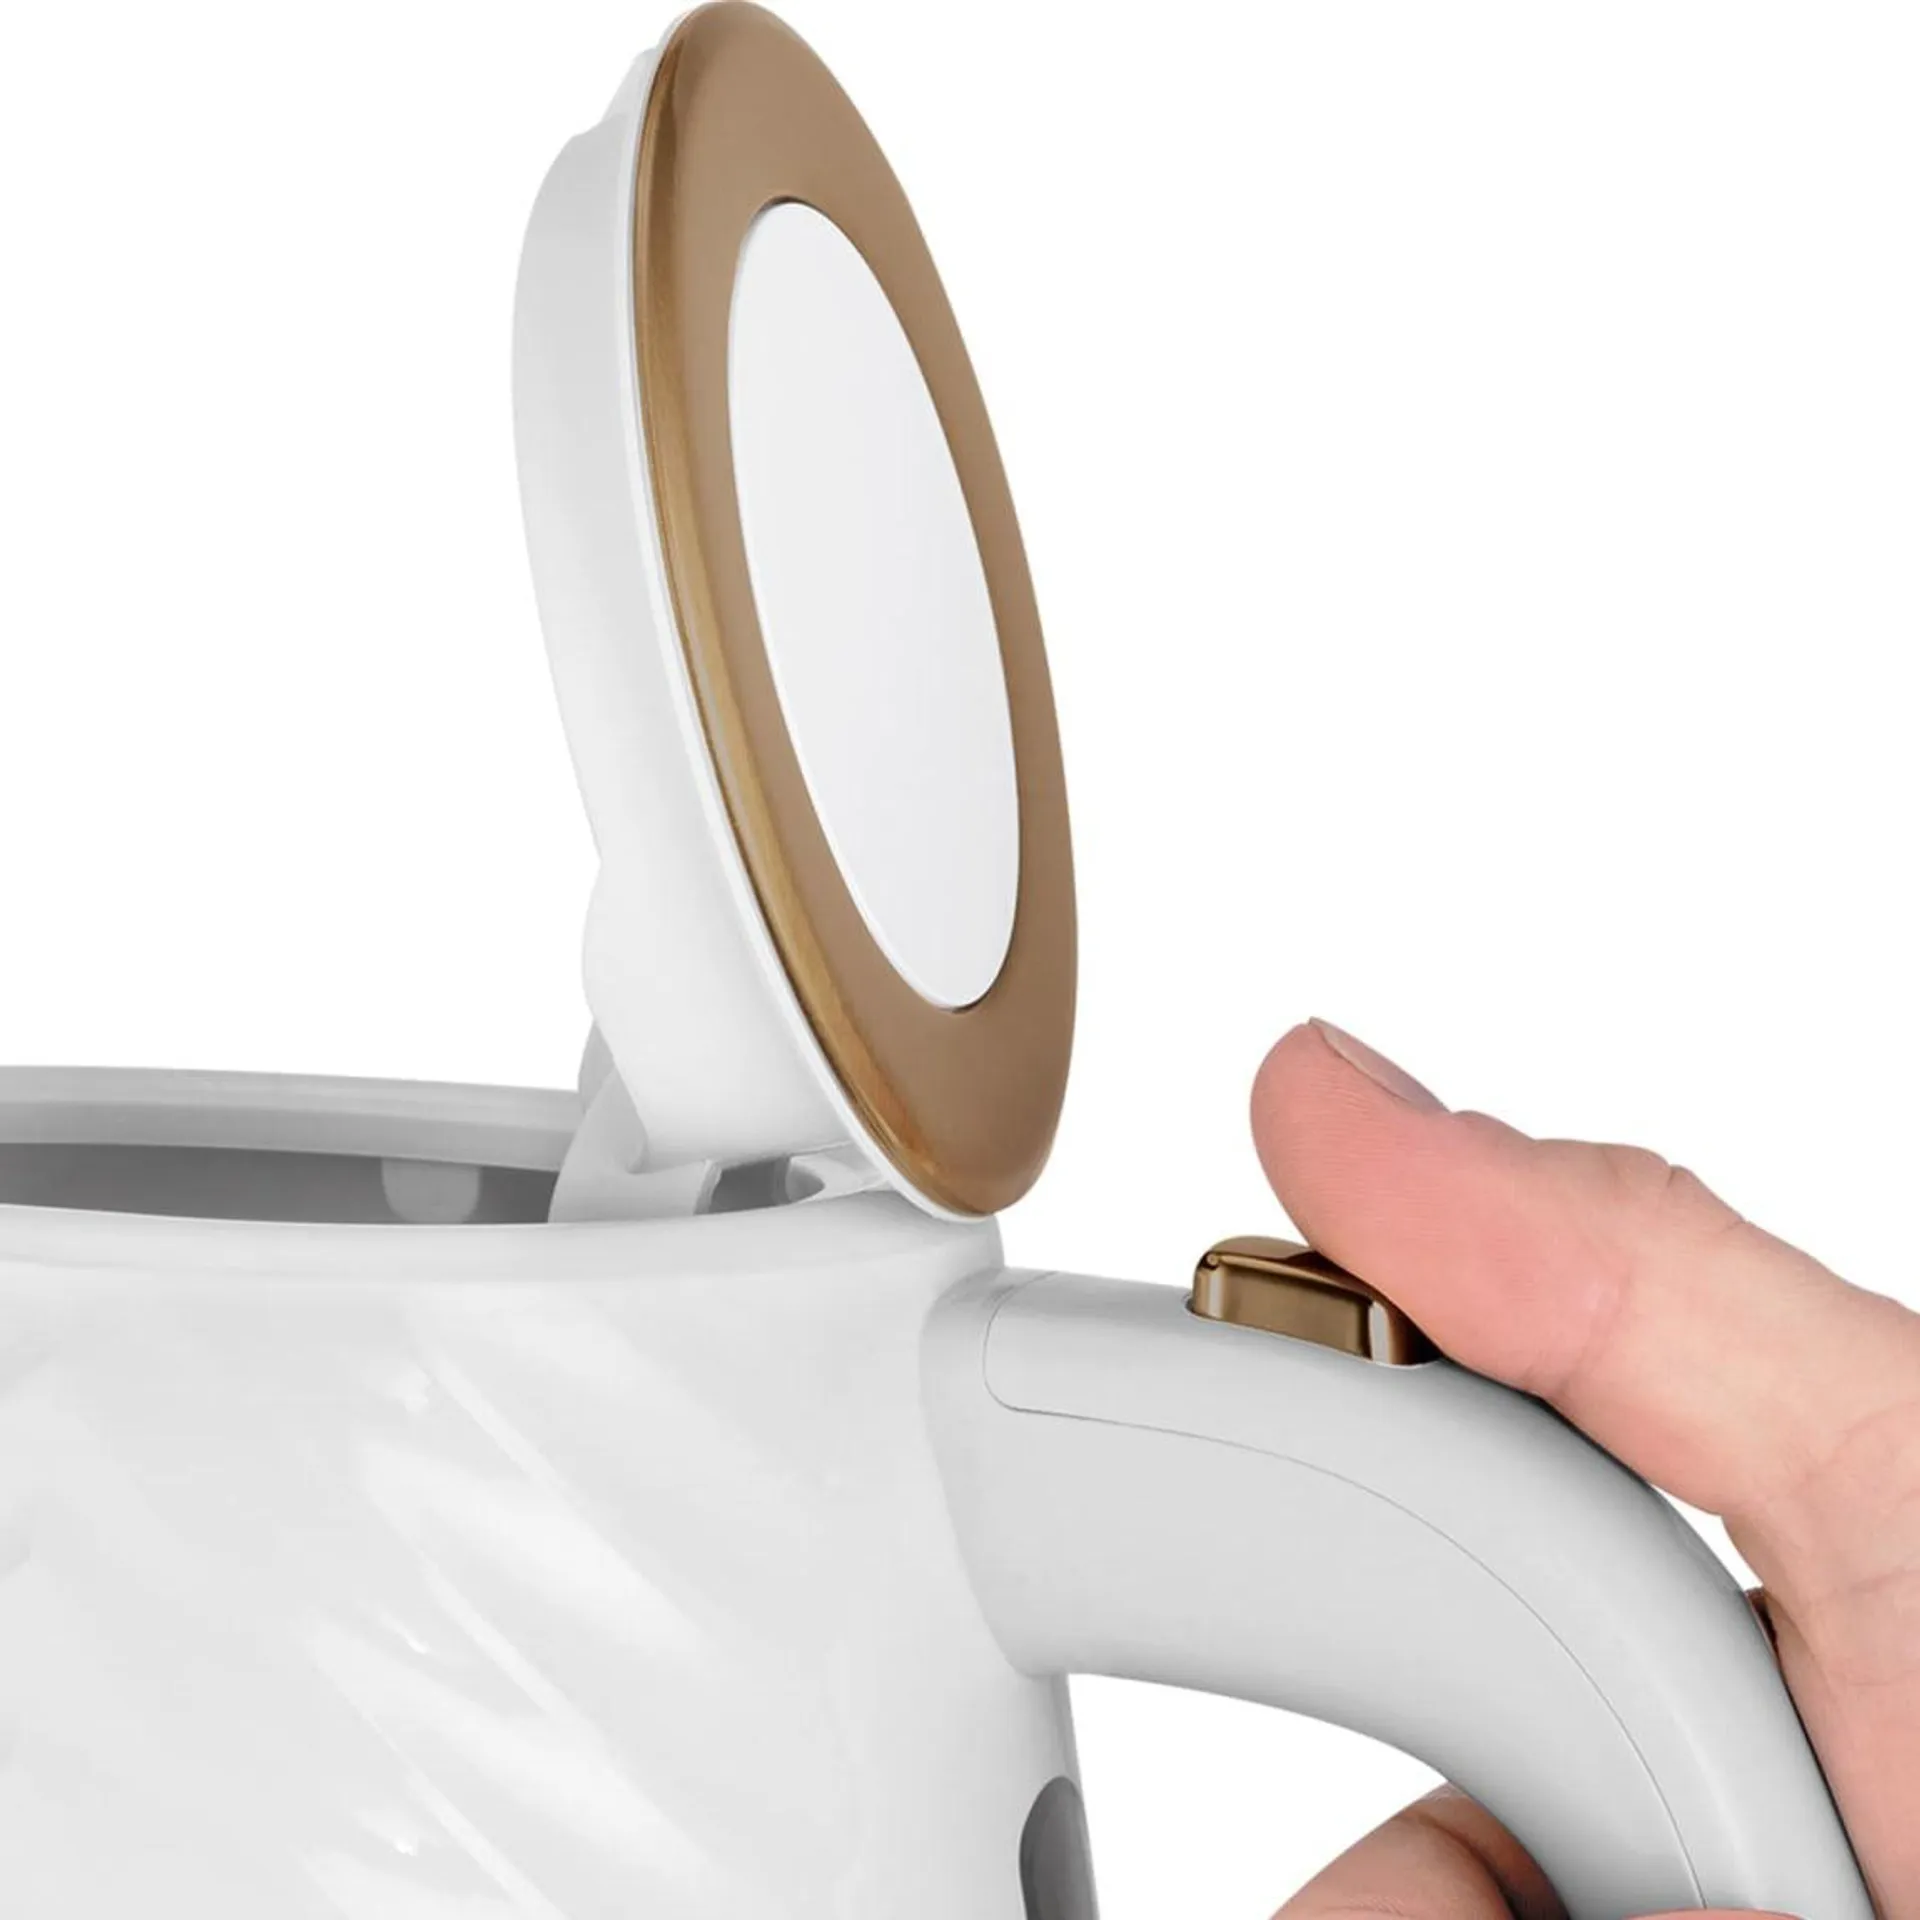 Russell Hobbs Groove Kettle 1.7L - White & Gold